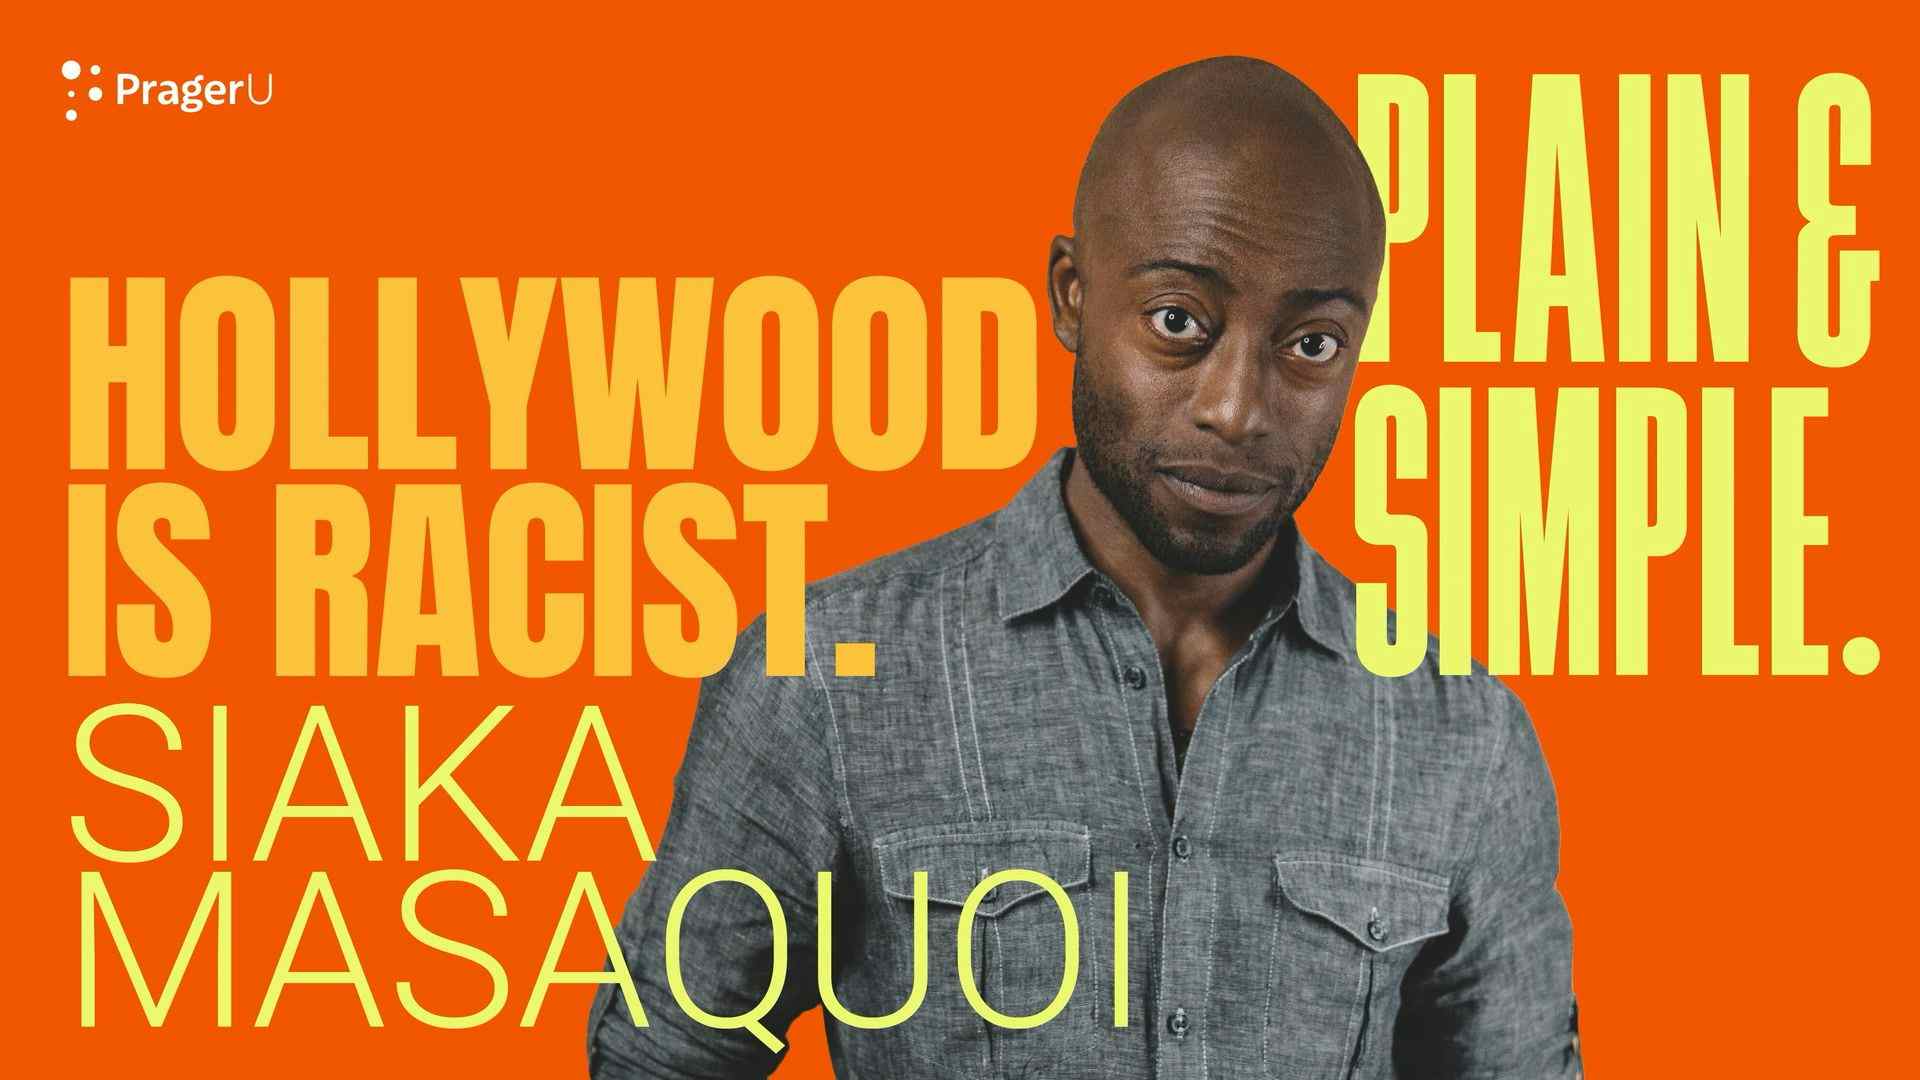 New-Age Racism In Hollywood